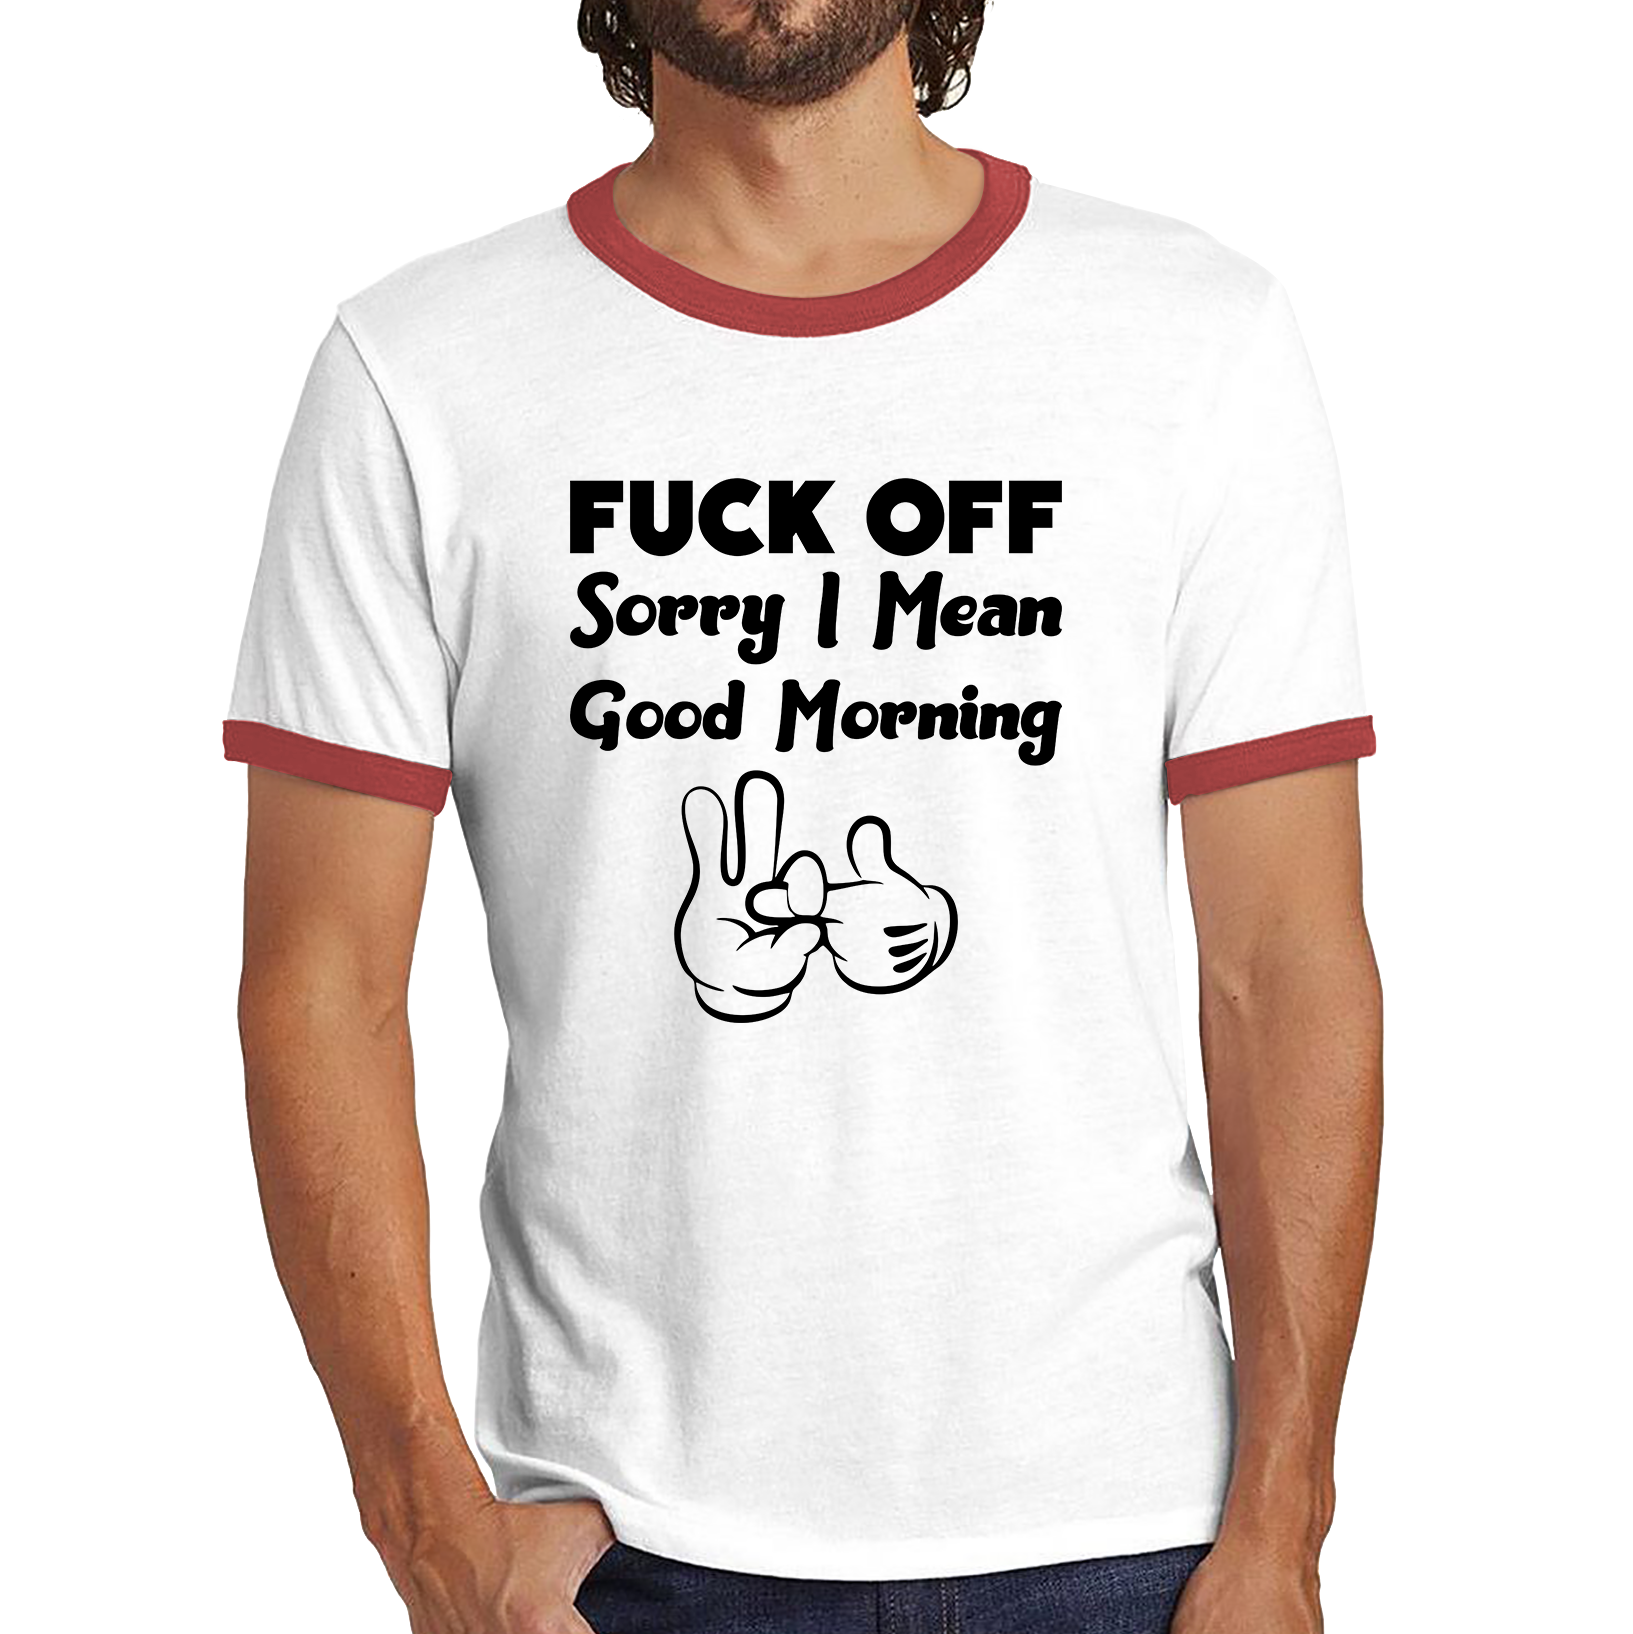 Fuck Off Sorry I Mean Good Morning Funny Offensive Novelty Sarcastic Humour Ringer T Shirt